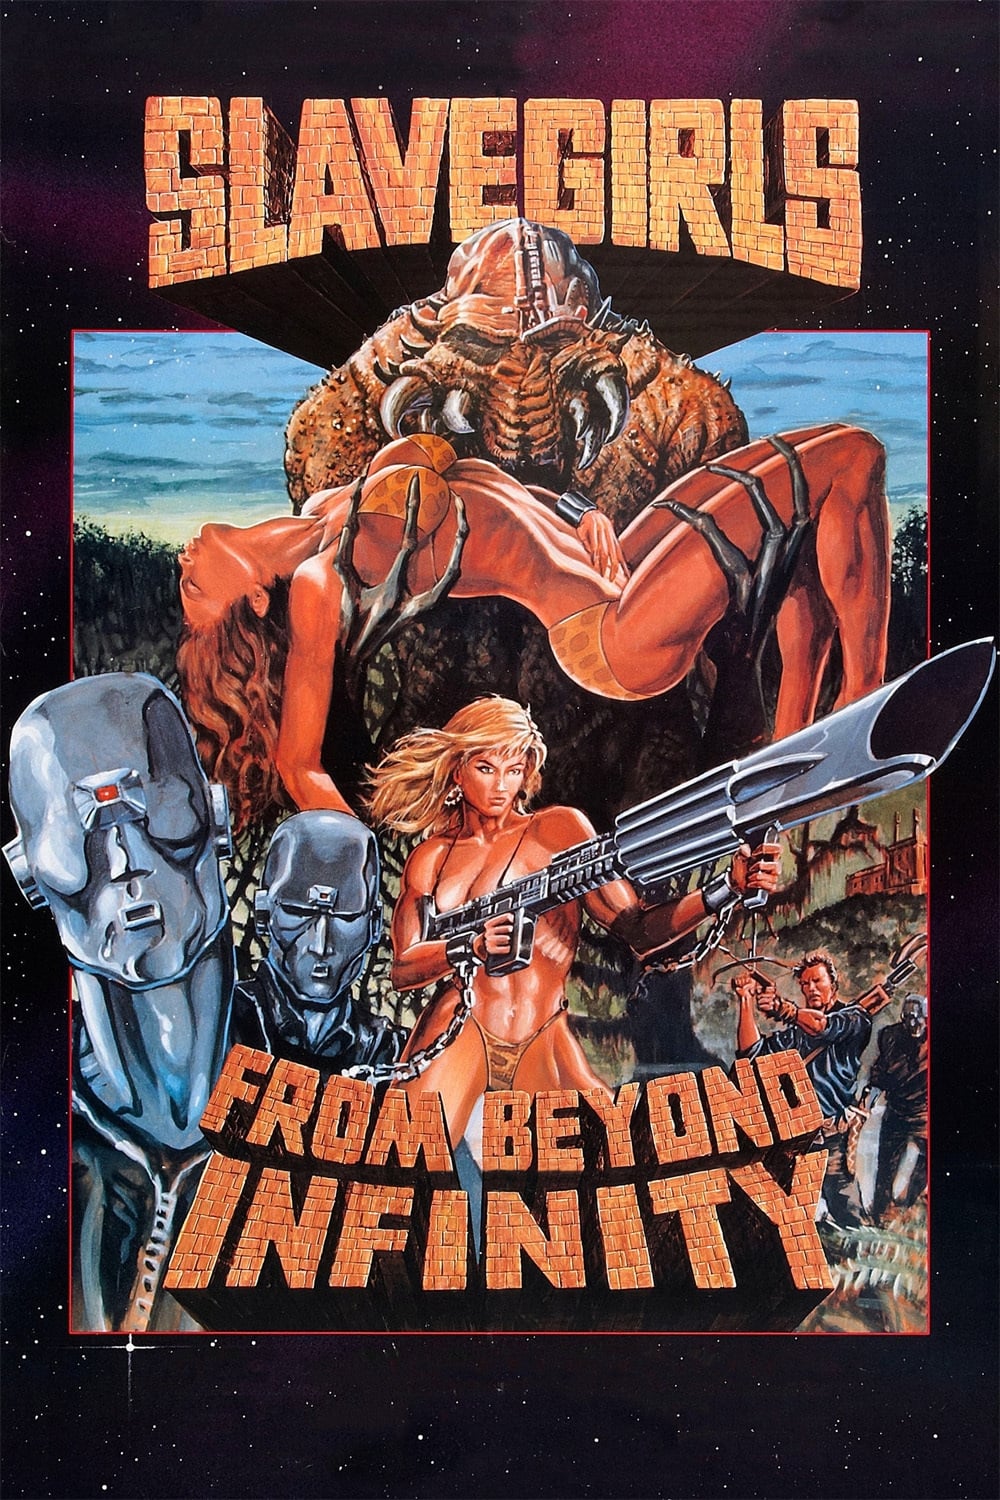 Slave Girls from Beyond Infinity (1987)